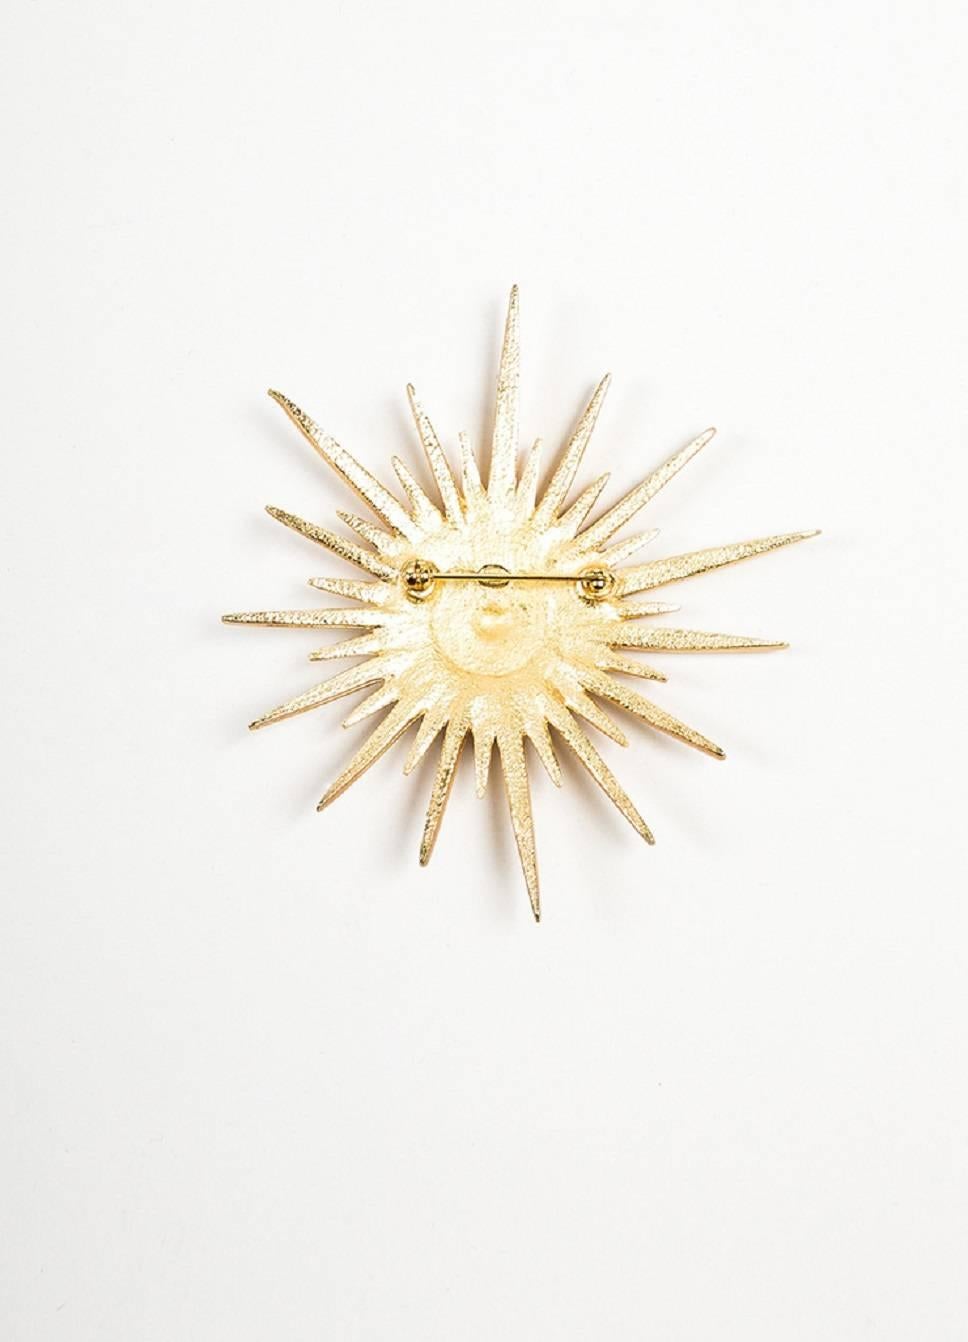 Comes with box. Flashy Chanel brooch from the 2001 Spring Collection. Pinned to a garment or worn on a scarf, this stunning piece adds instant glamour to any ensemble. Spiked starburst design. Gold tone metal sparkling with pave set rhinestone